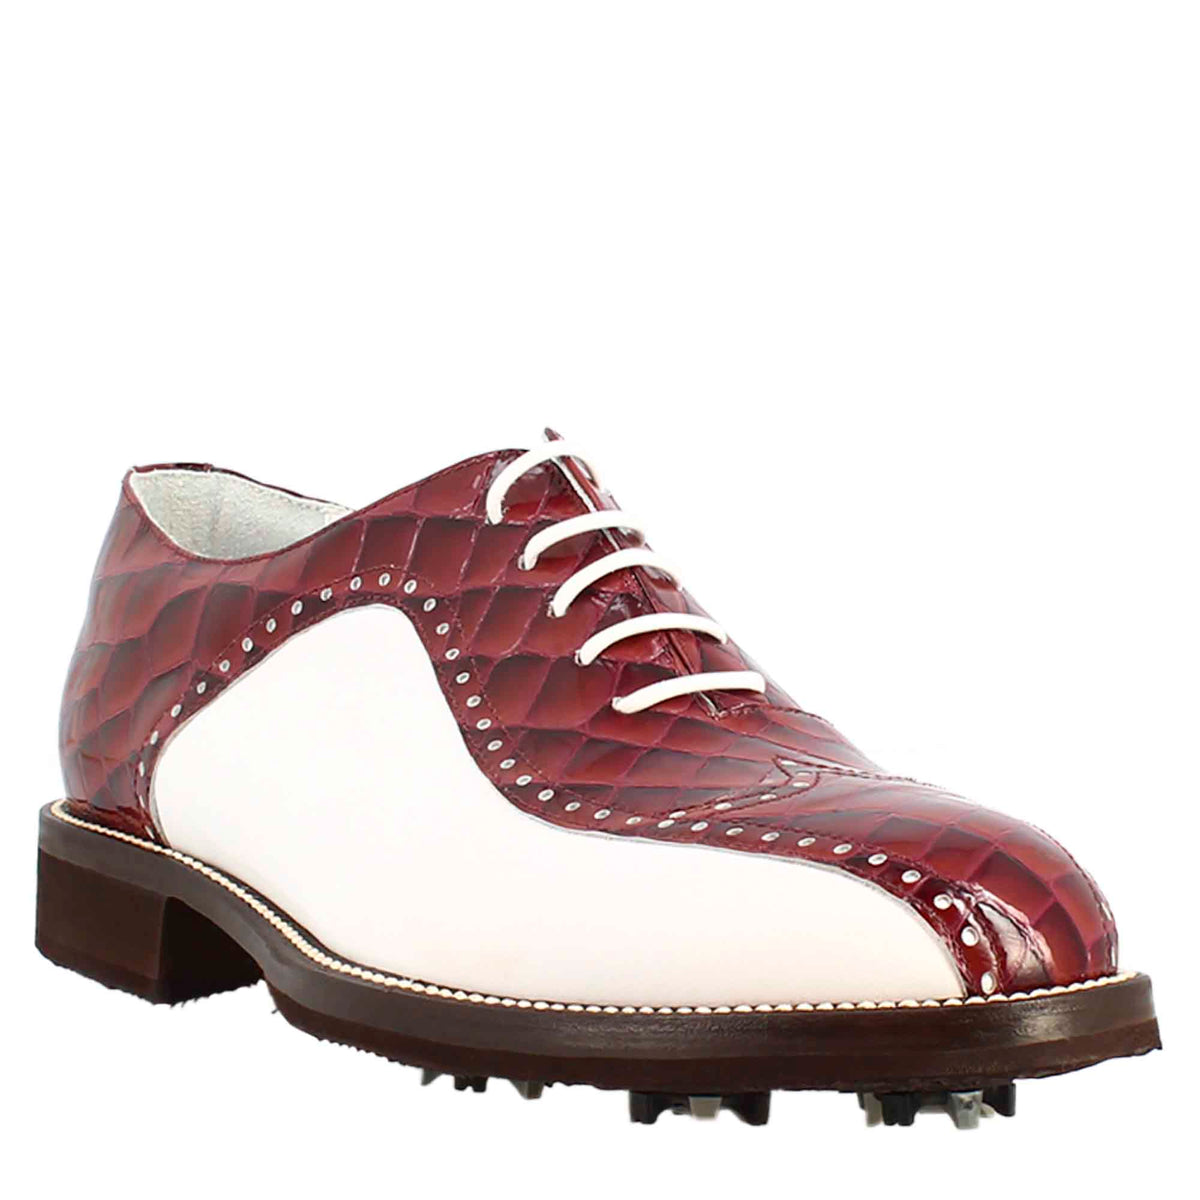 Handmade women's golf shoes in white crocodile and bordeaux full-grain leather